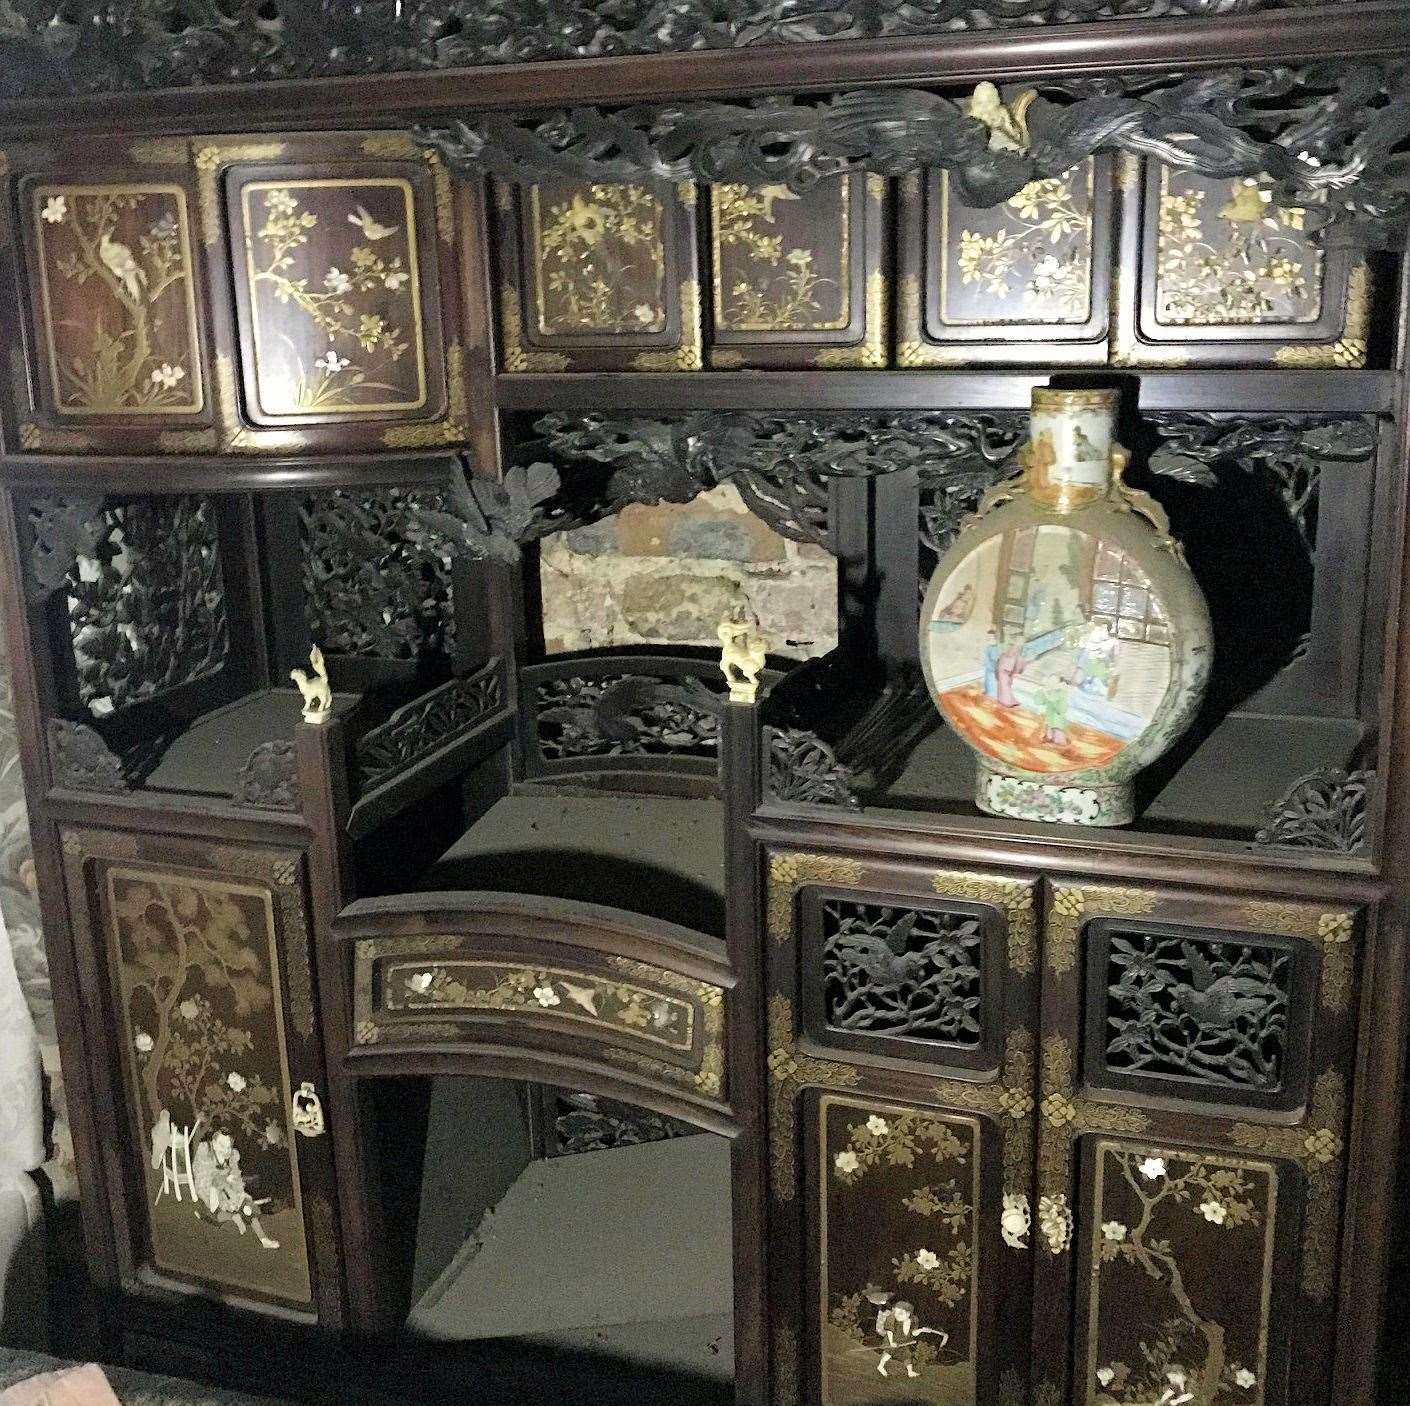 The stolen items included this dresser